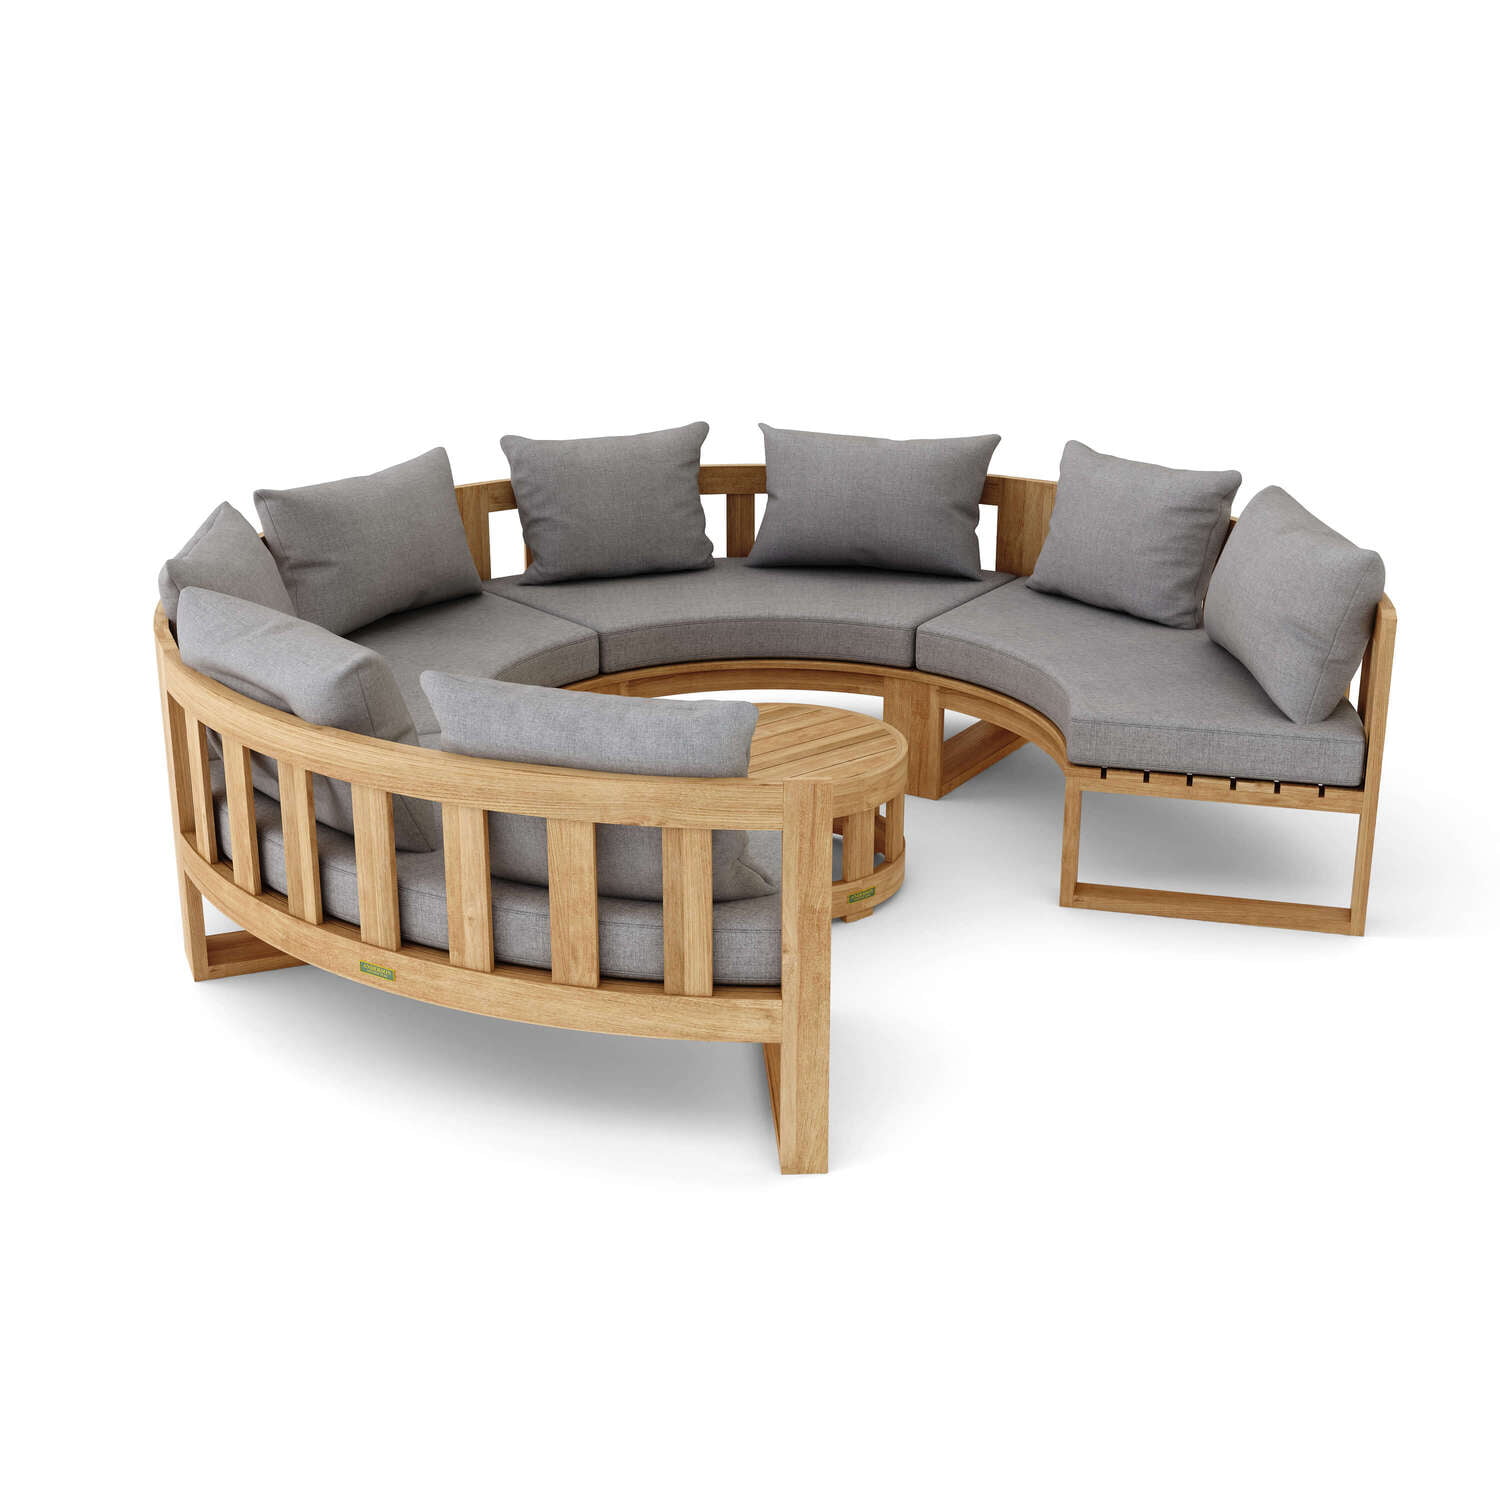 Picture of Anderson Teak SET-810 Circular Modular Deep Seating Set, Natural Smooth Well Sanded